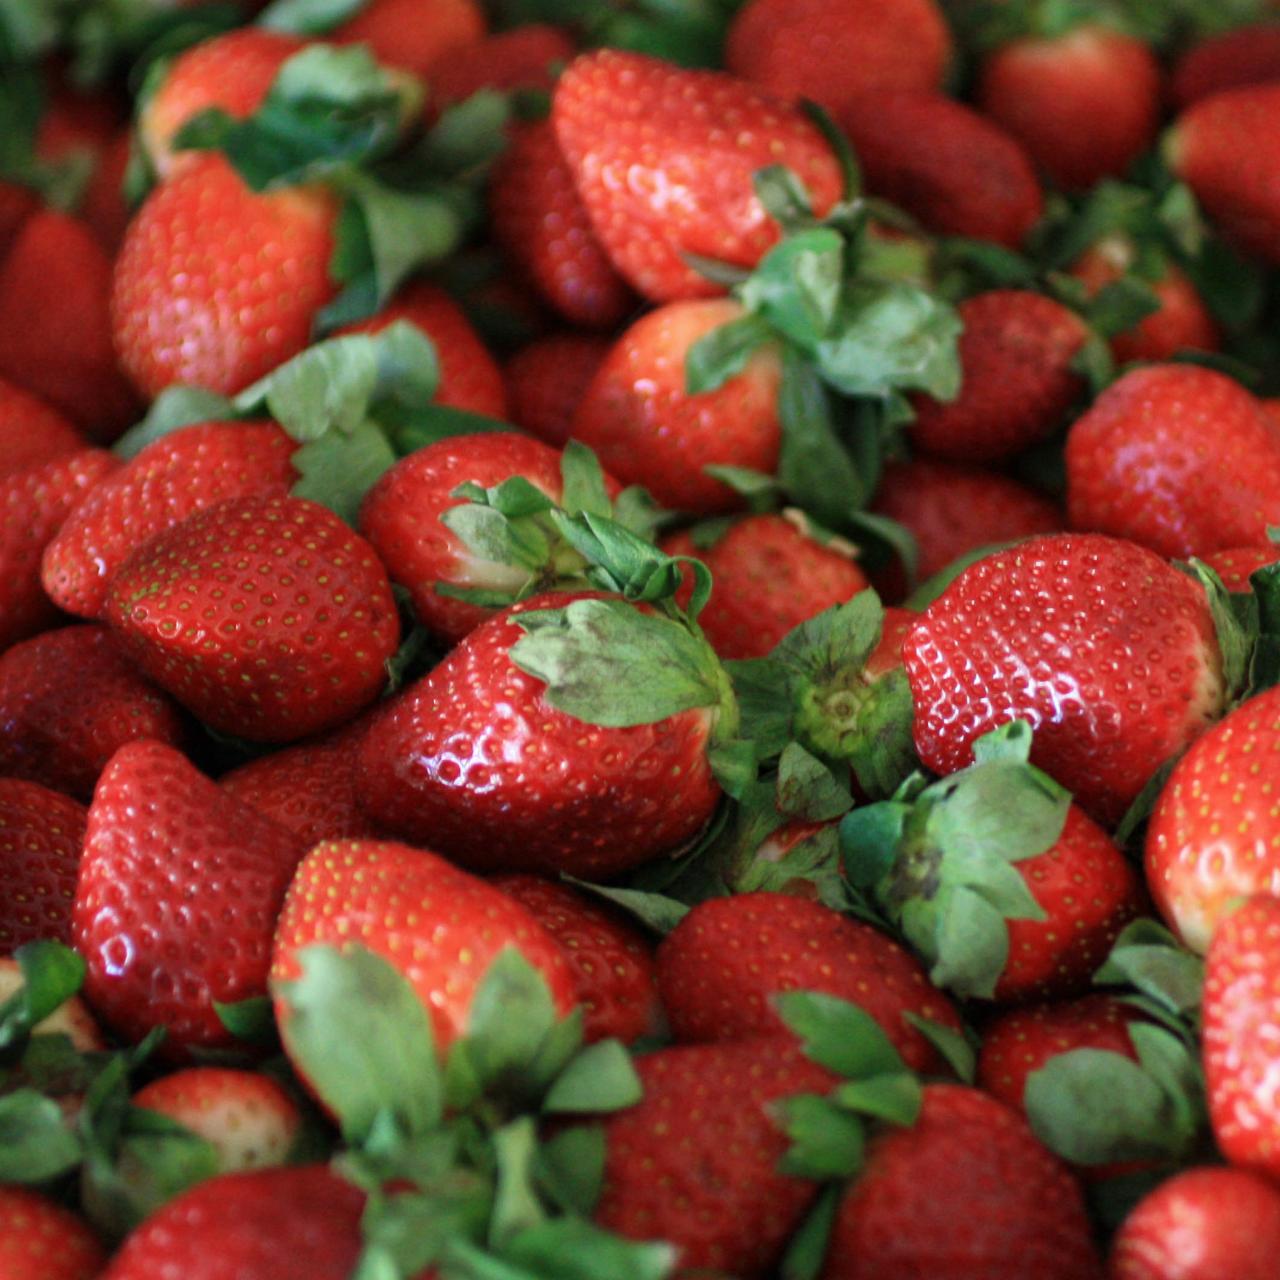 Keep Strawberries Fresh and Delicious with Plant Power